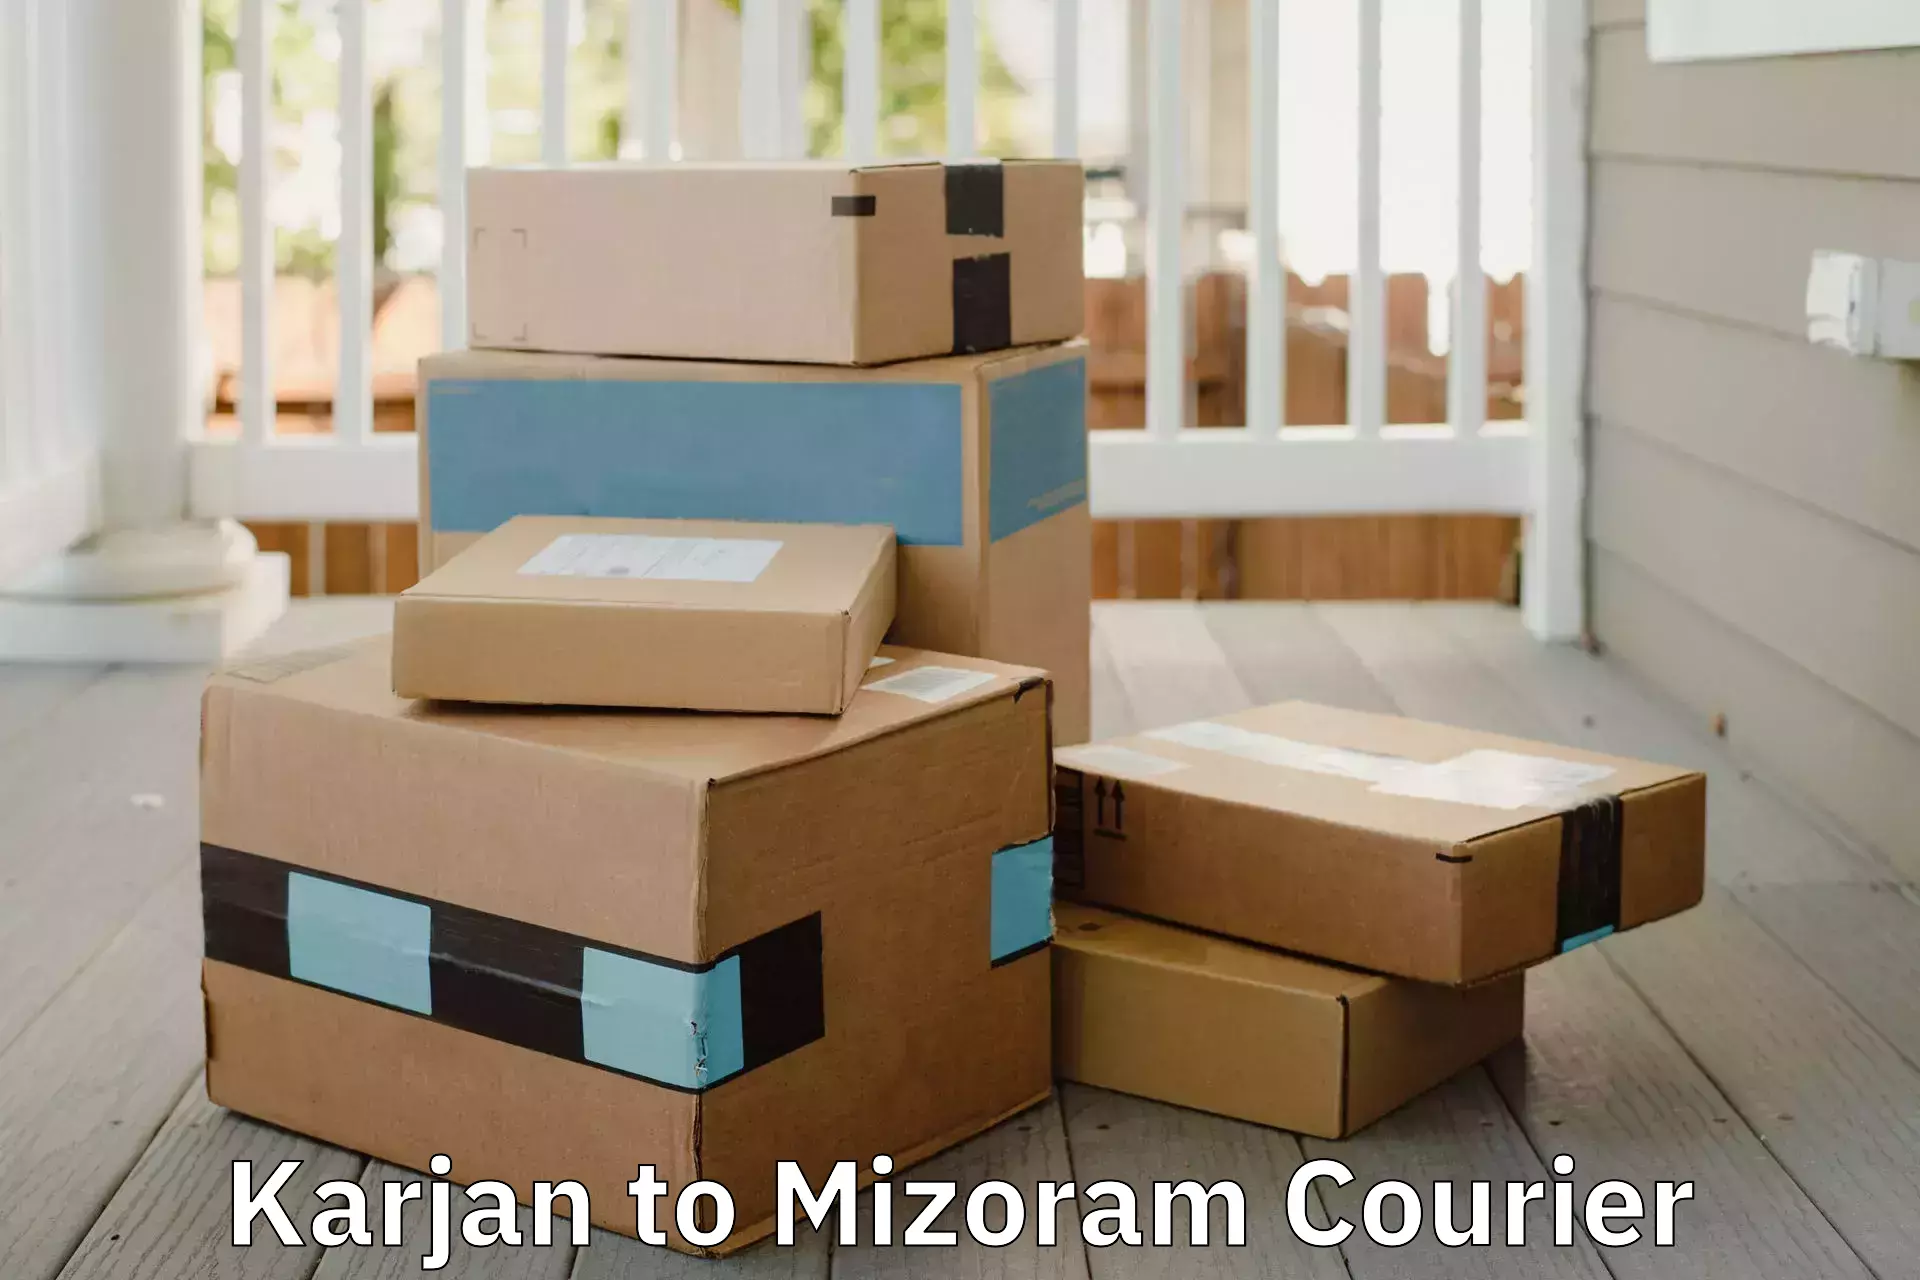 Efficient packing and moving Karjan to Darlawn